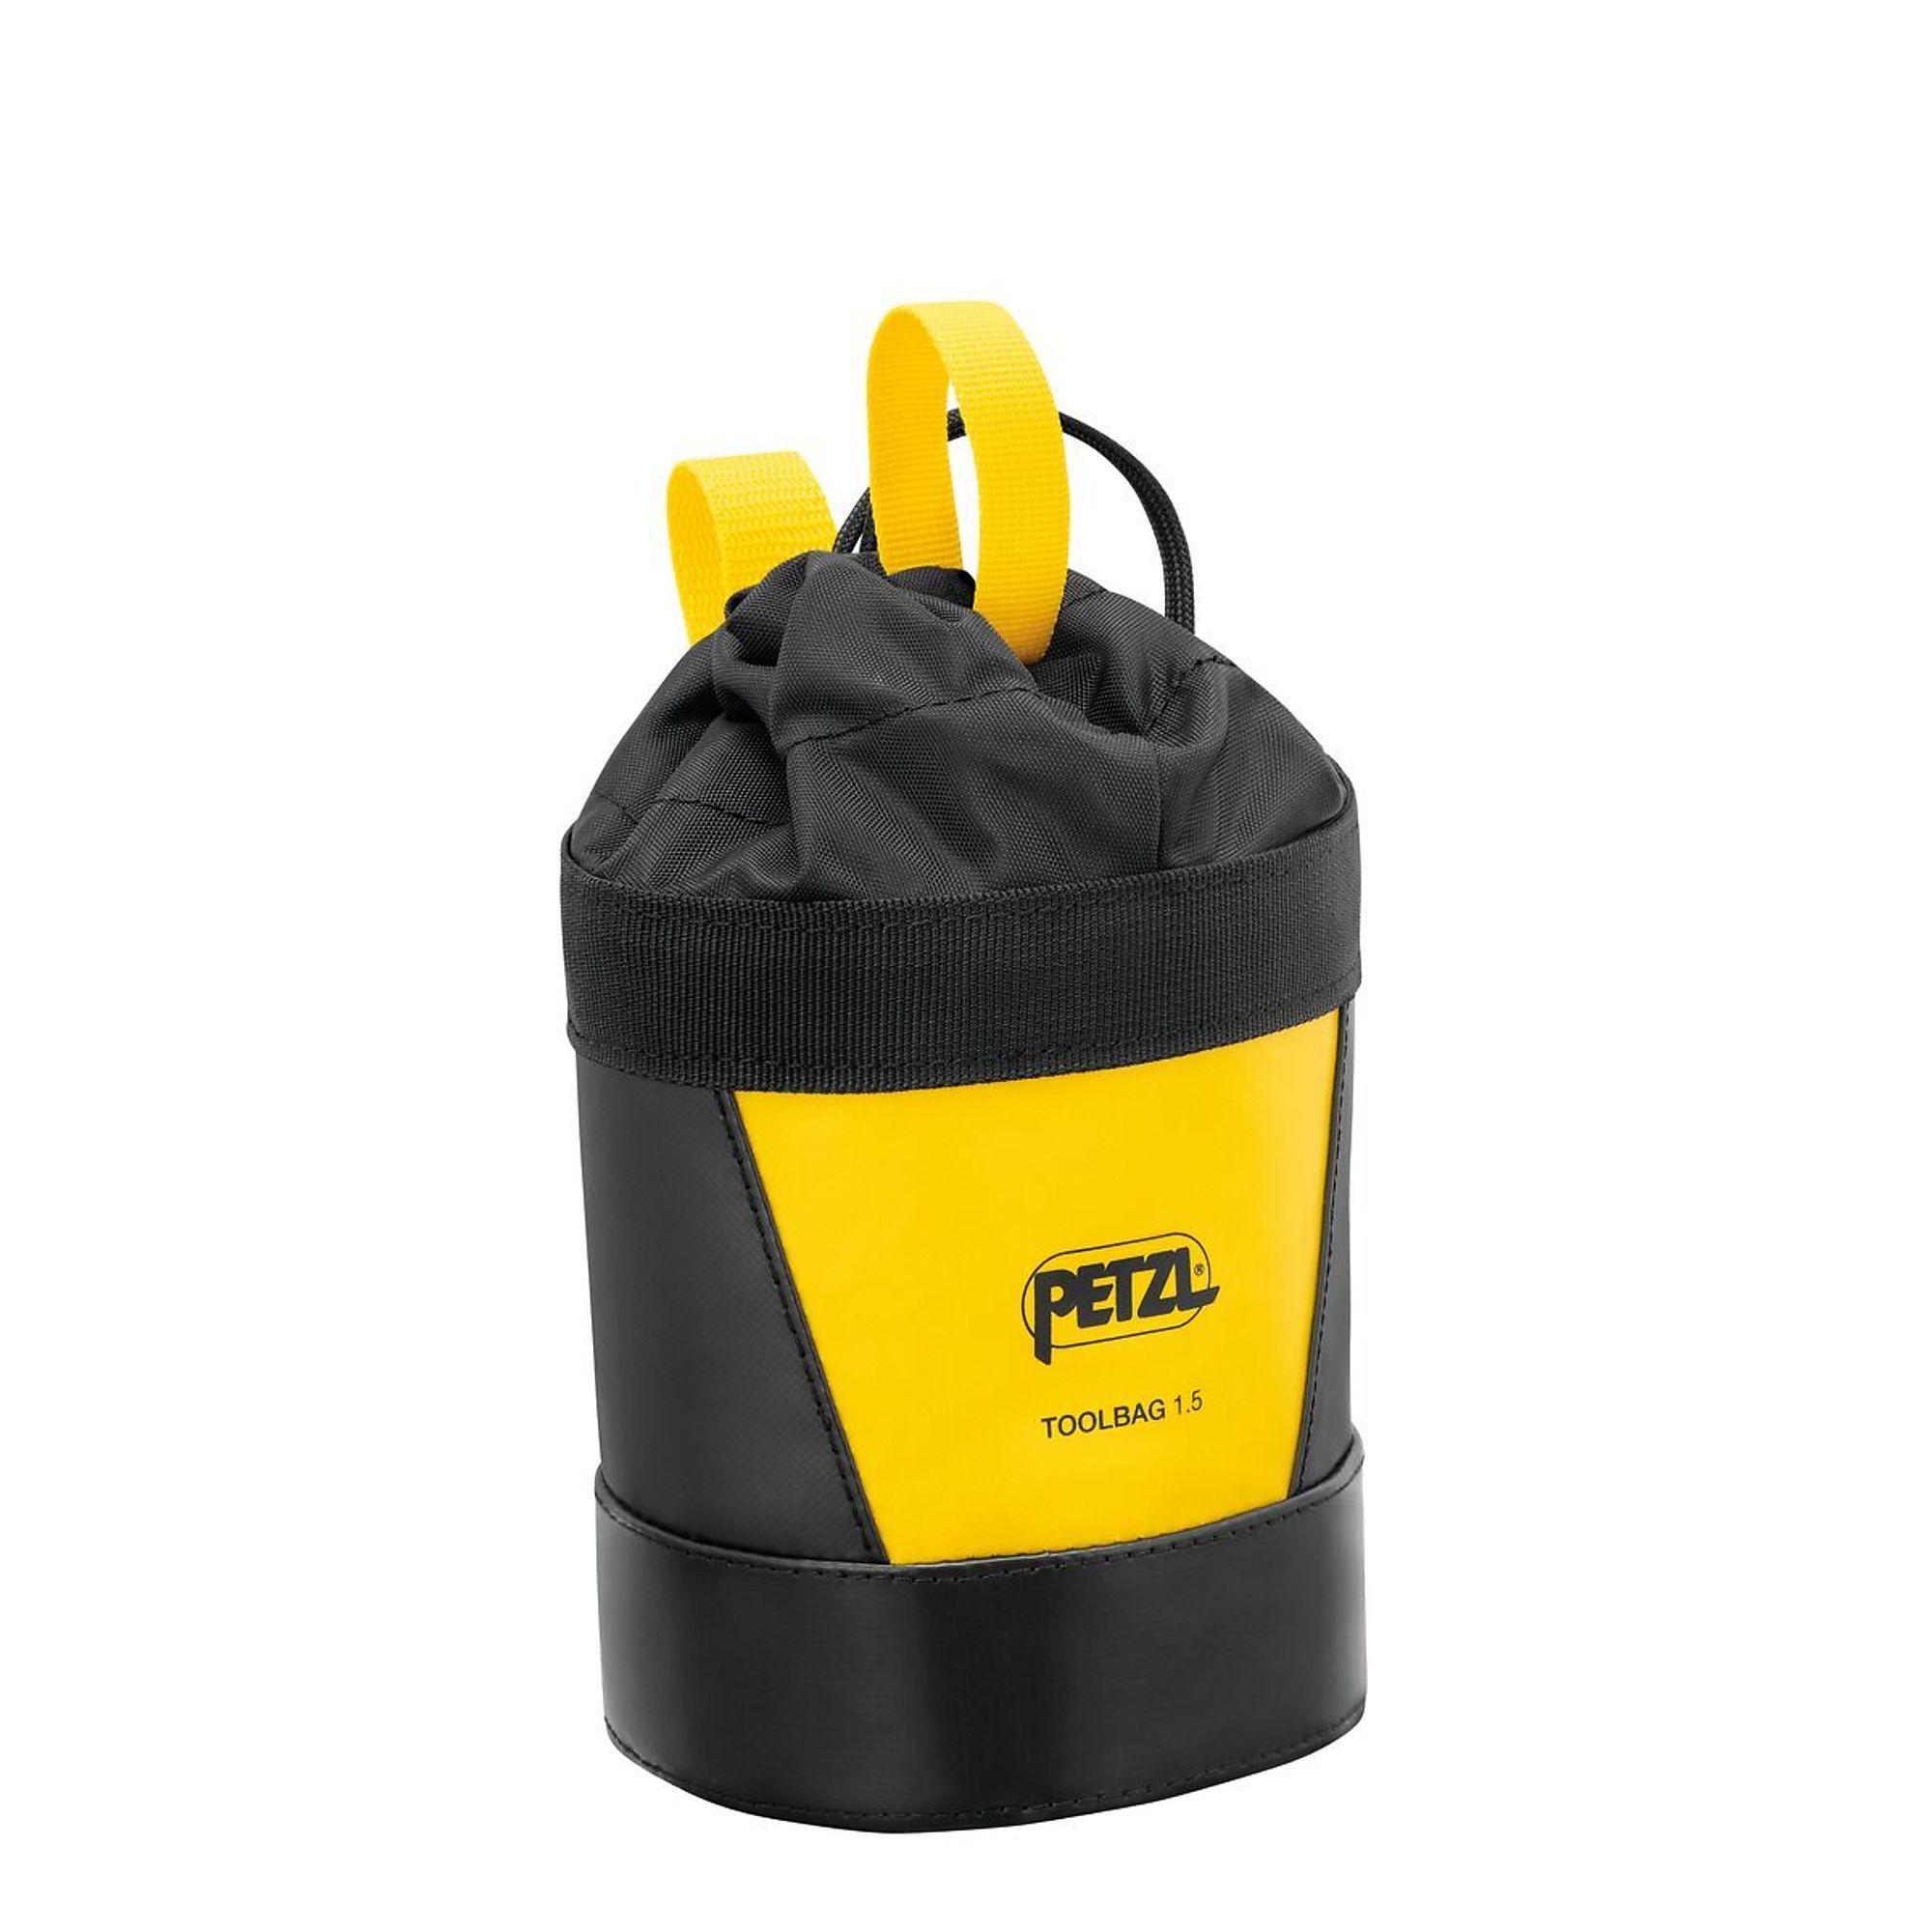 Petzl, TOOLBAG 1.5L organize tools during suspended work, Model S047BA00